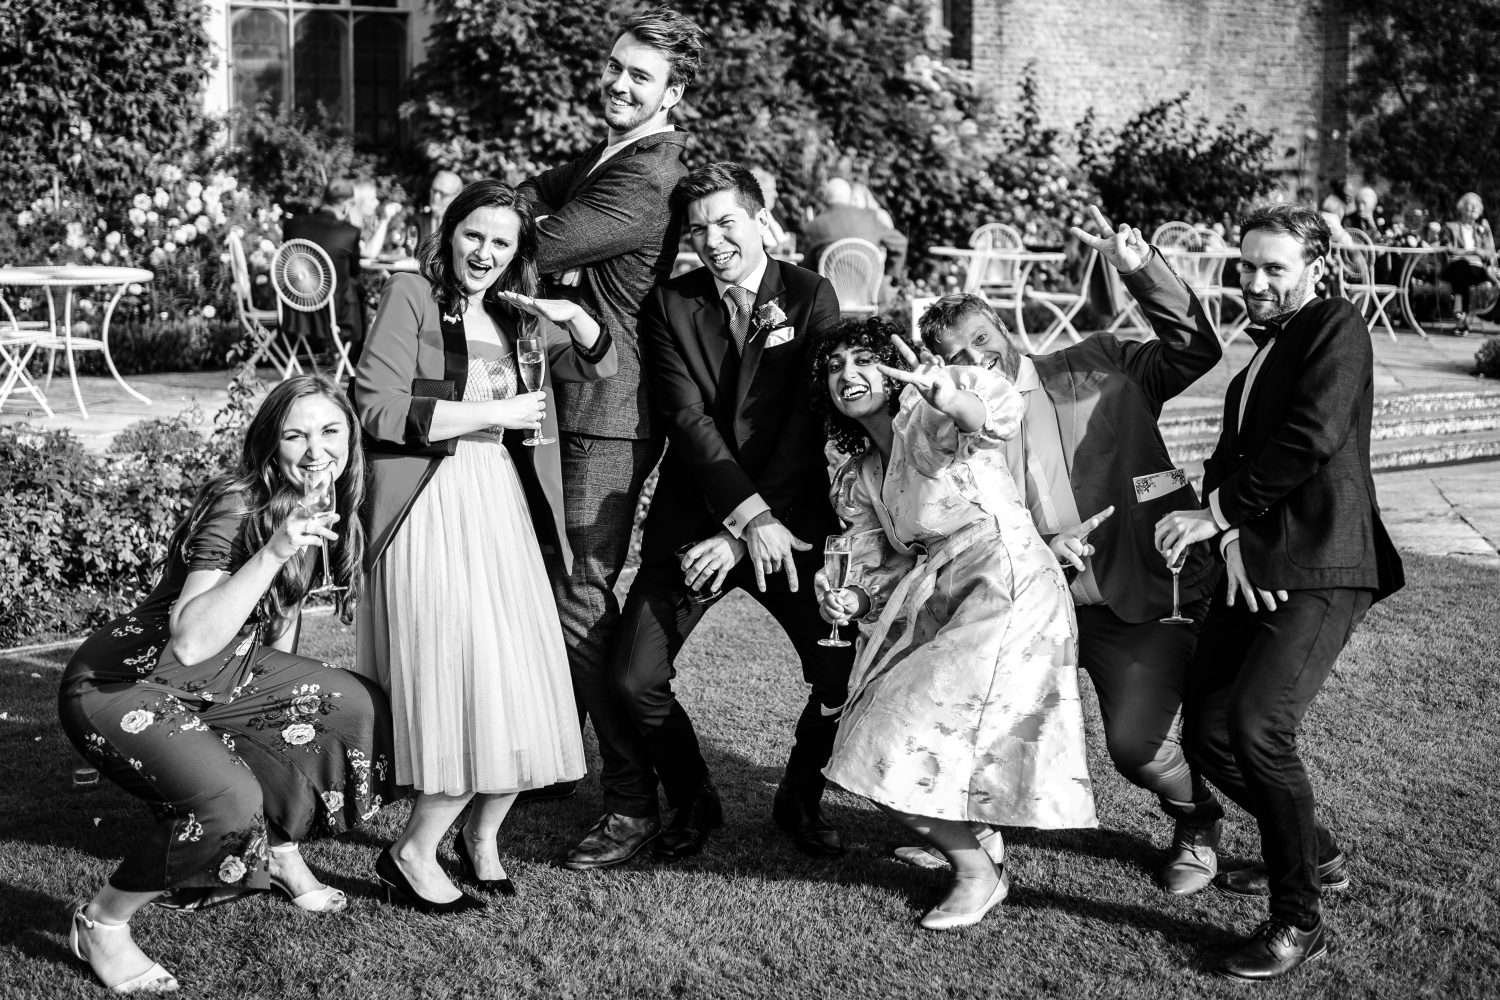 A groom on his wedding day, surrounded by his friends. Everyone is striking a funny pose and all are laughing.